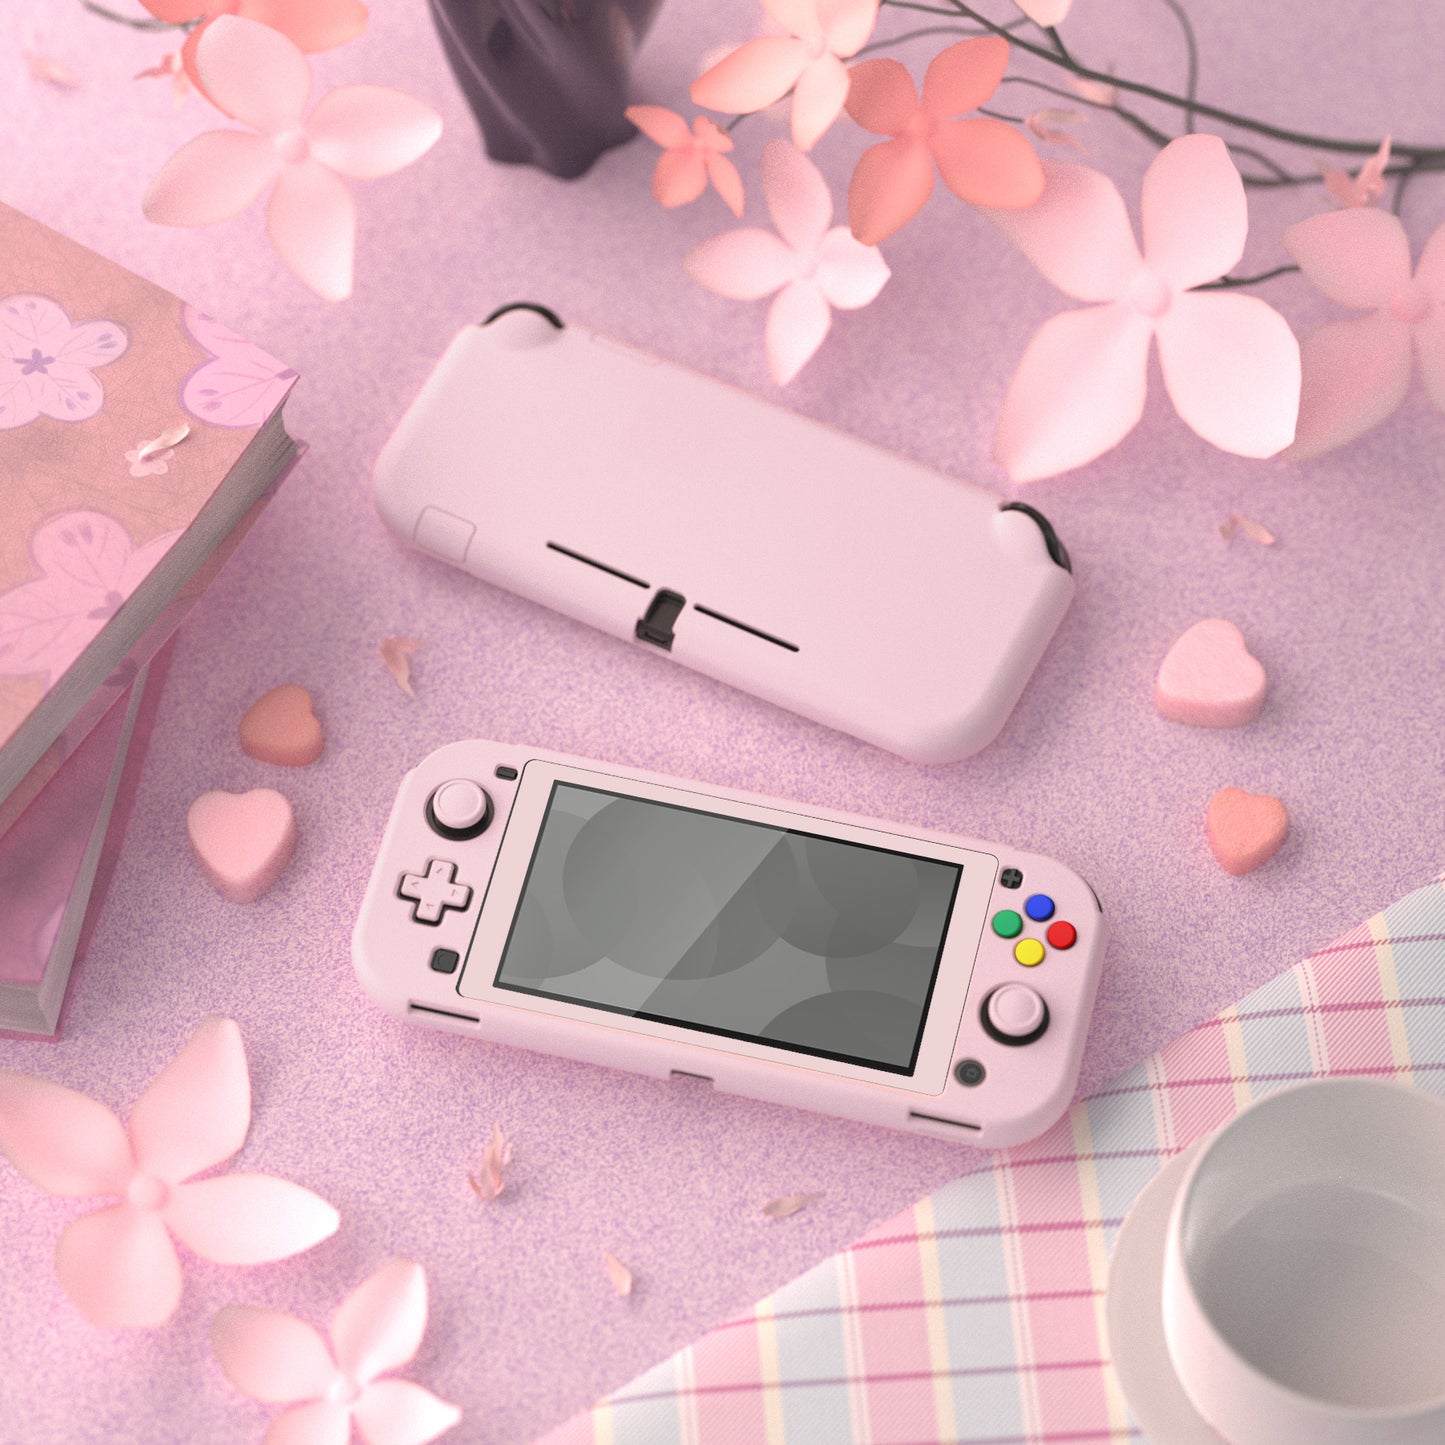 PlayVital Soft Touch Cherry Blossoms Pink Customized Protective Grip Case for Nintendo Switch Lite, Hard Cover Protector for Nintendo Switch Lite - 1 x White Border Tempered Glass Screen Protector Included - YYNLP005 PlayVital